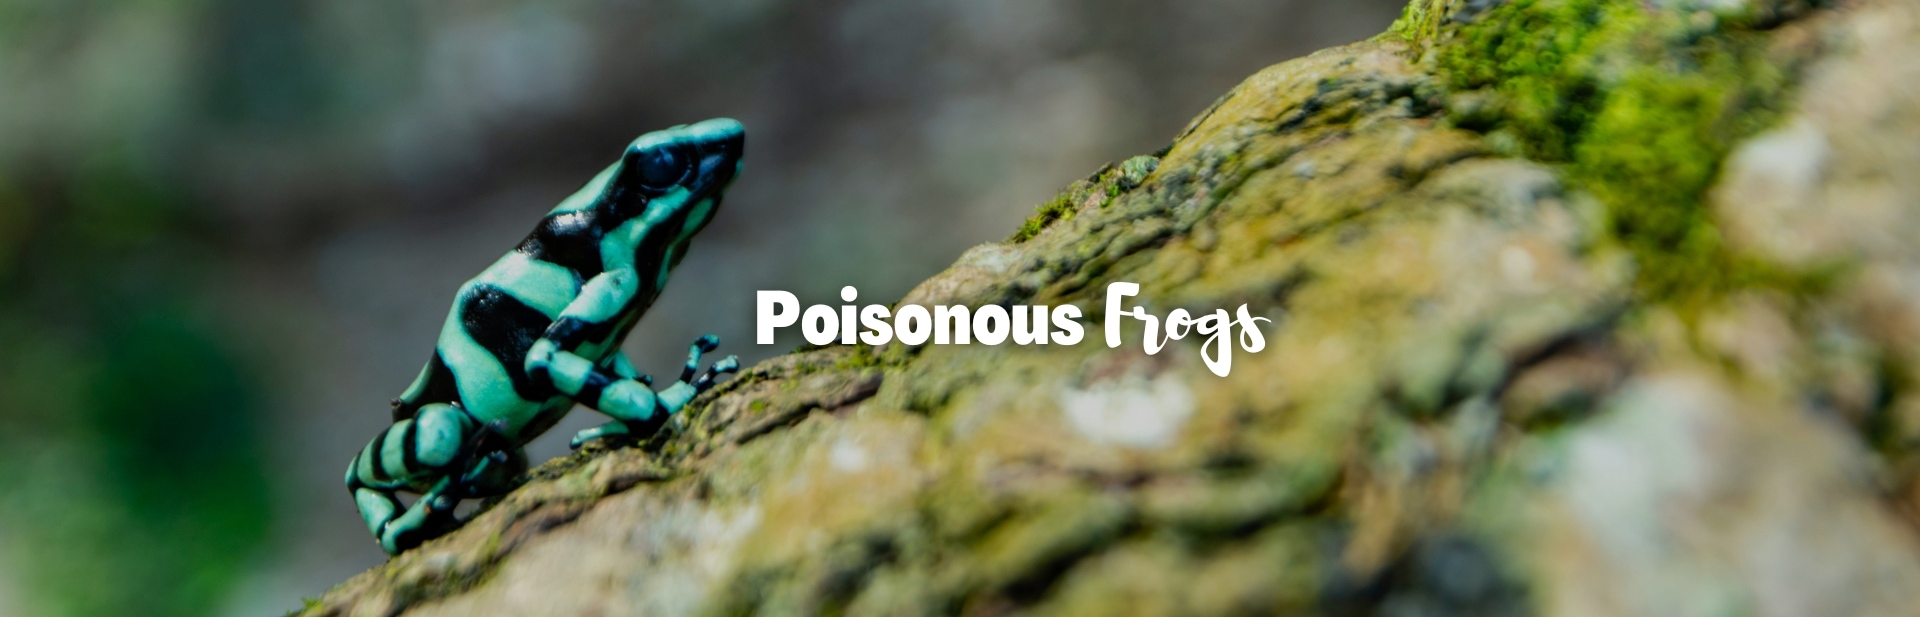 Venomous Hoppers: The Incredible World of Earth’s Most Poisonous Frogs and Toads